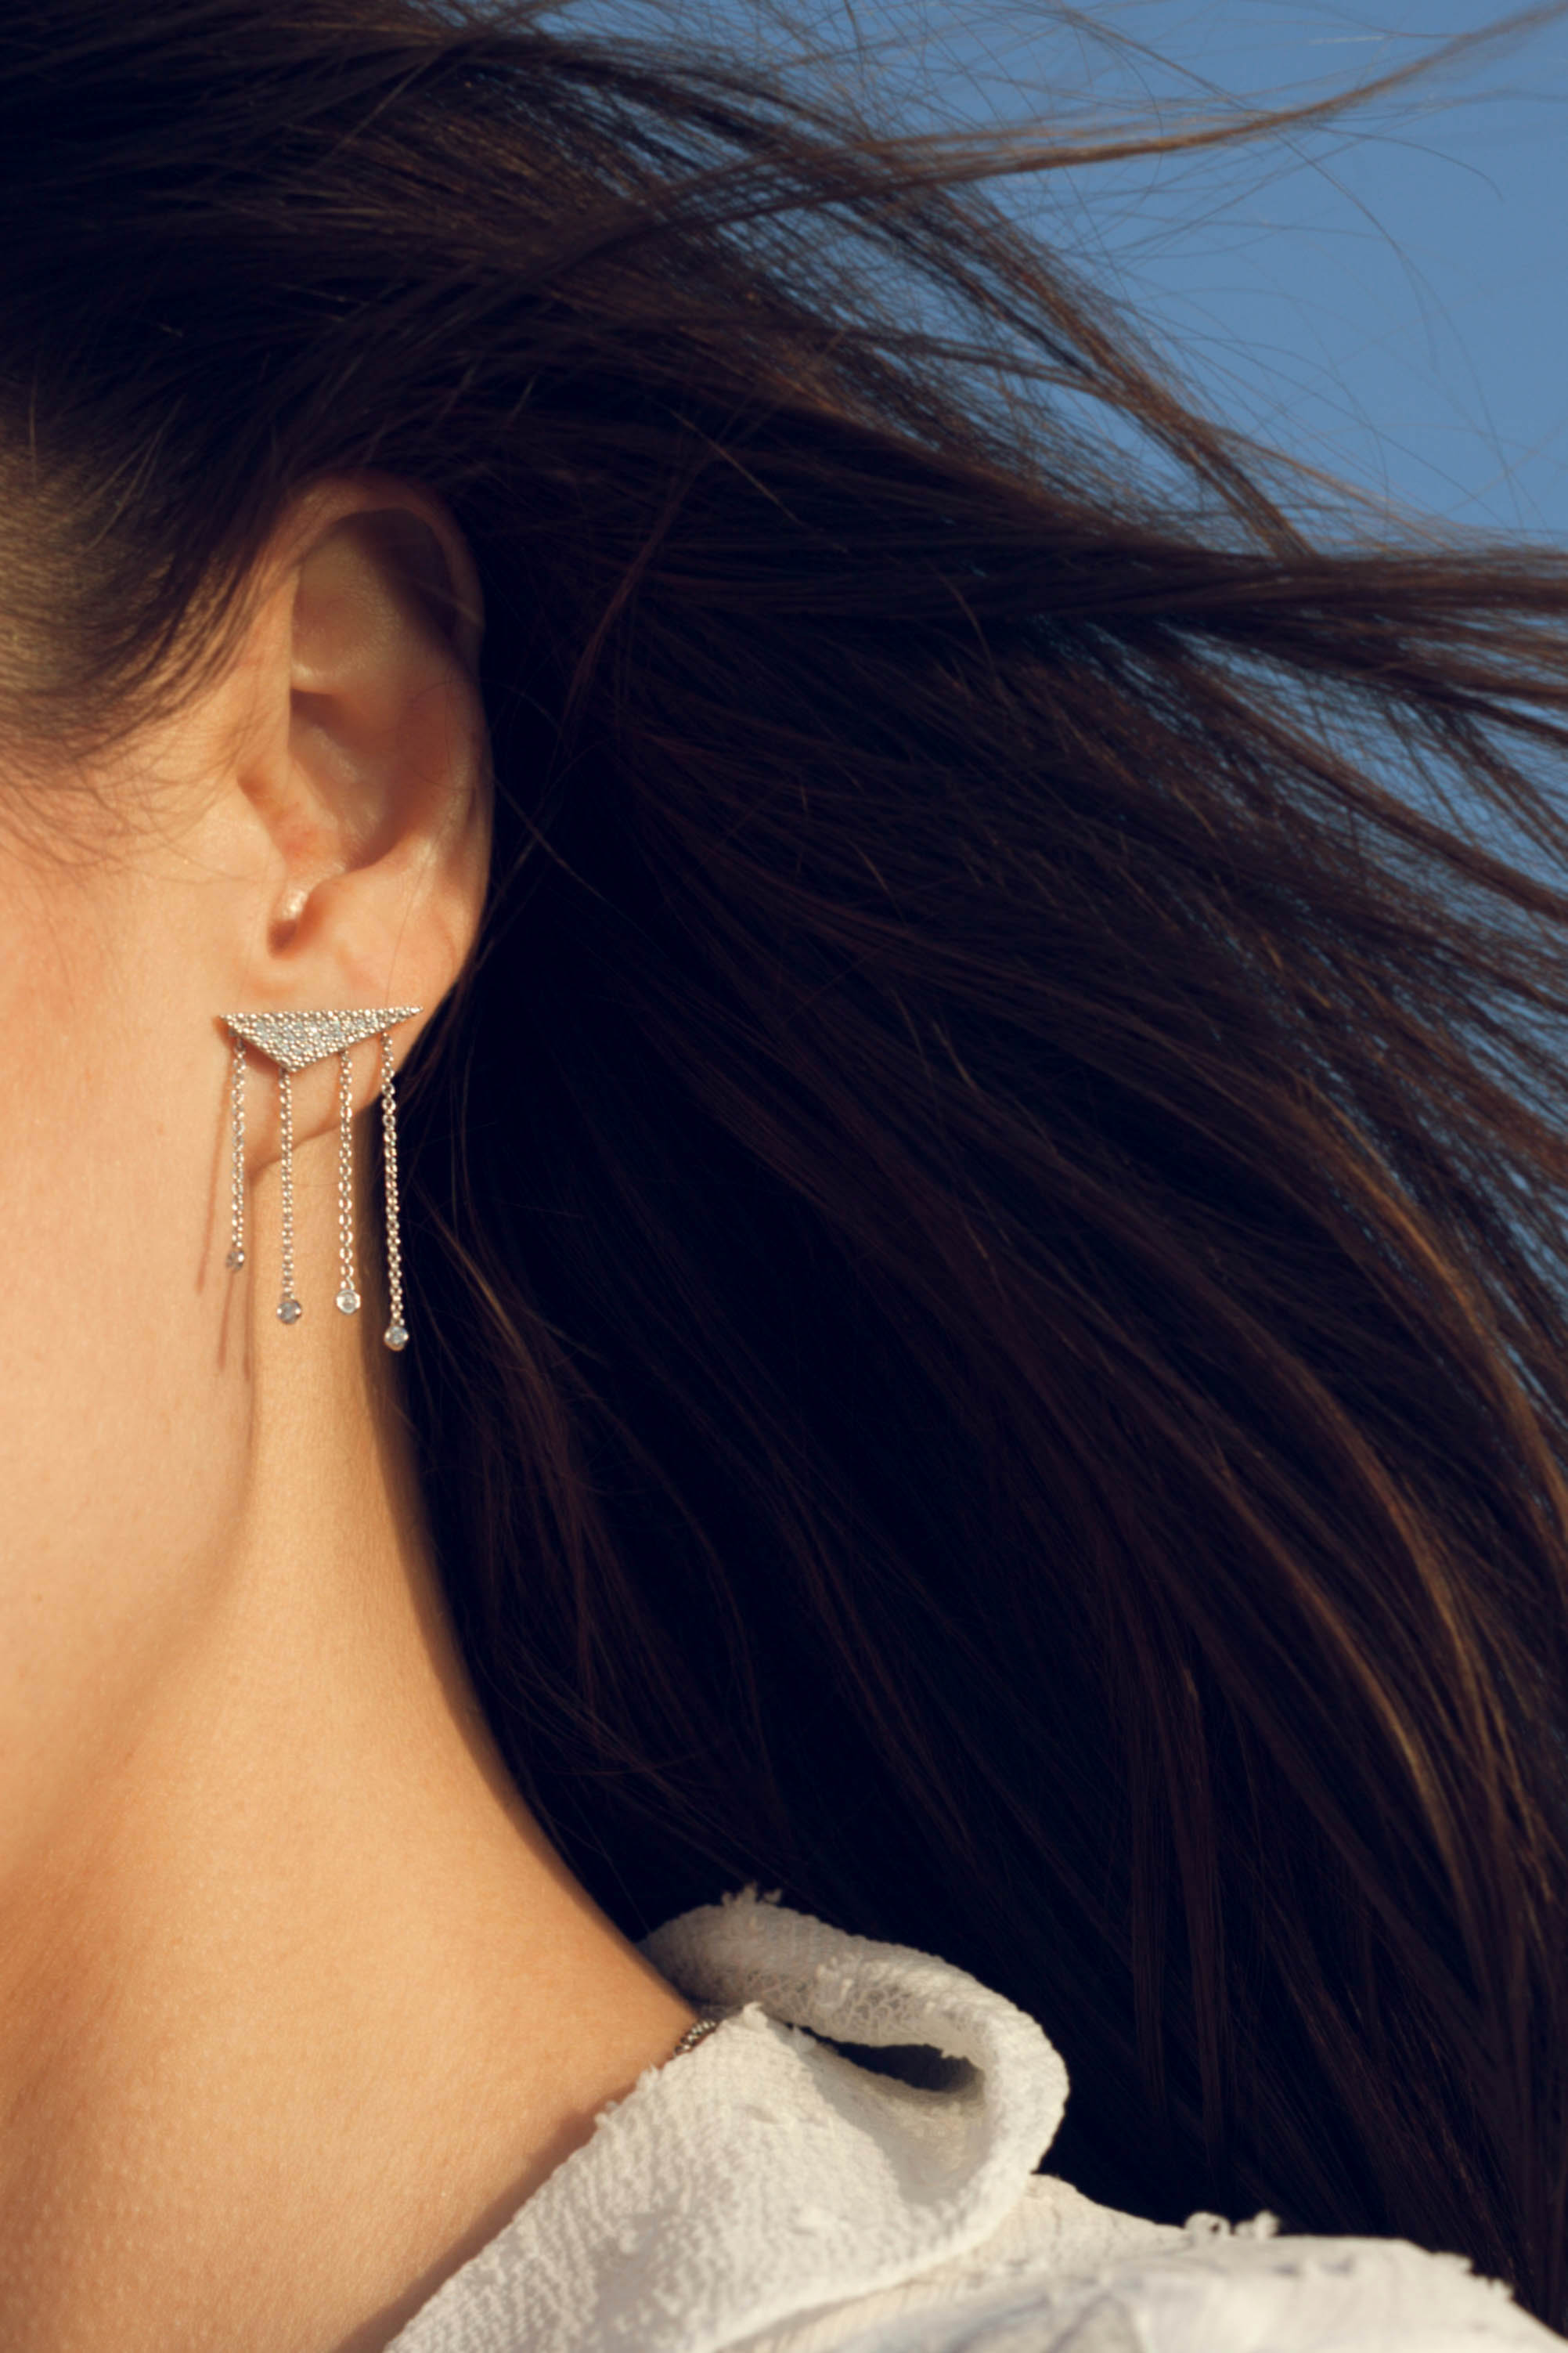 Shooting Stars &lt;br&gt;Shiny Earrings with removable chains from ZOLDI jewels shop